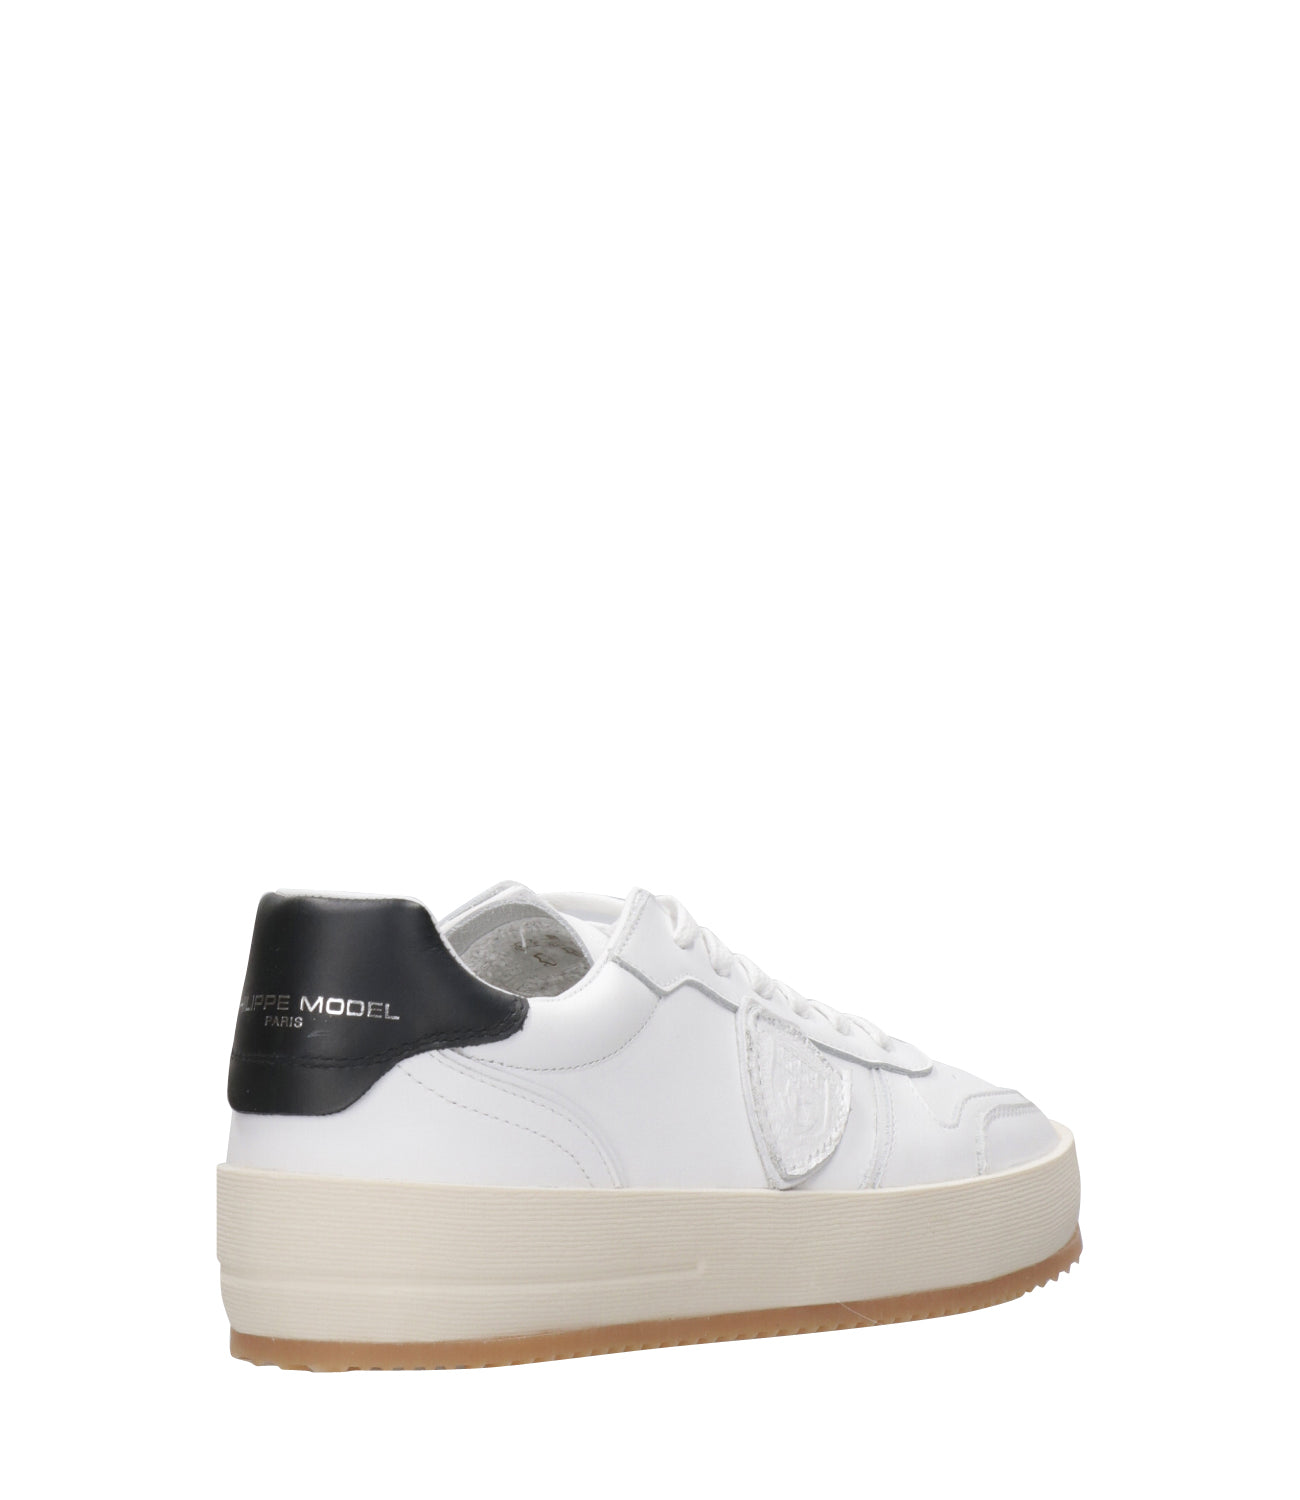 Philippe Model | Black and White Sneakers